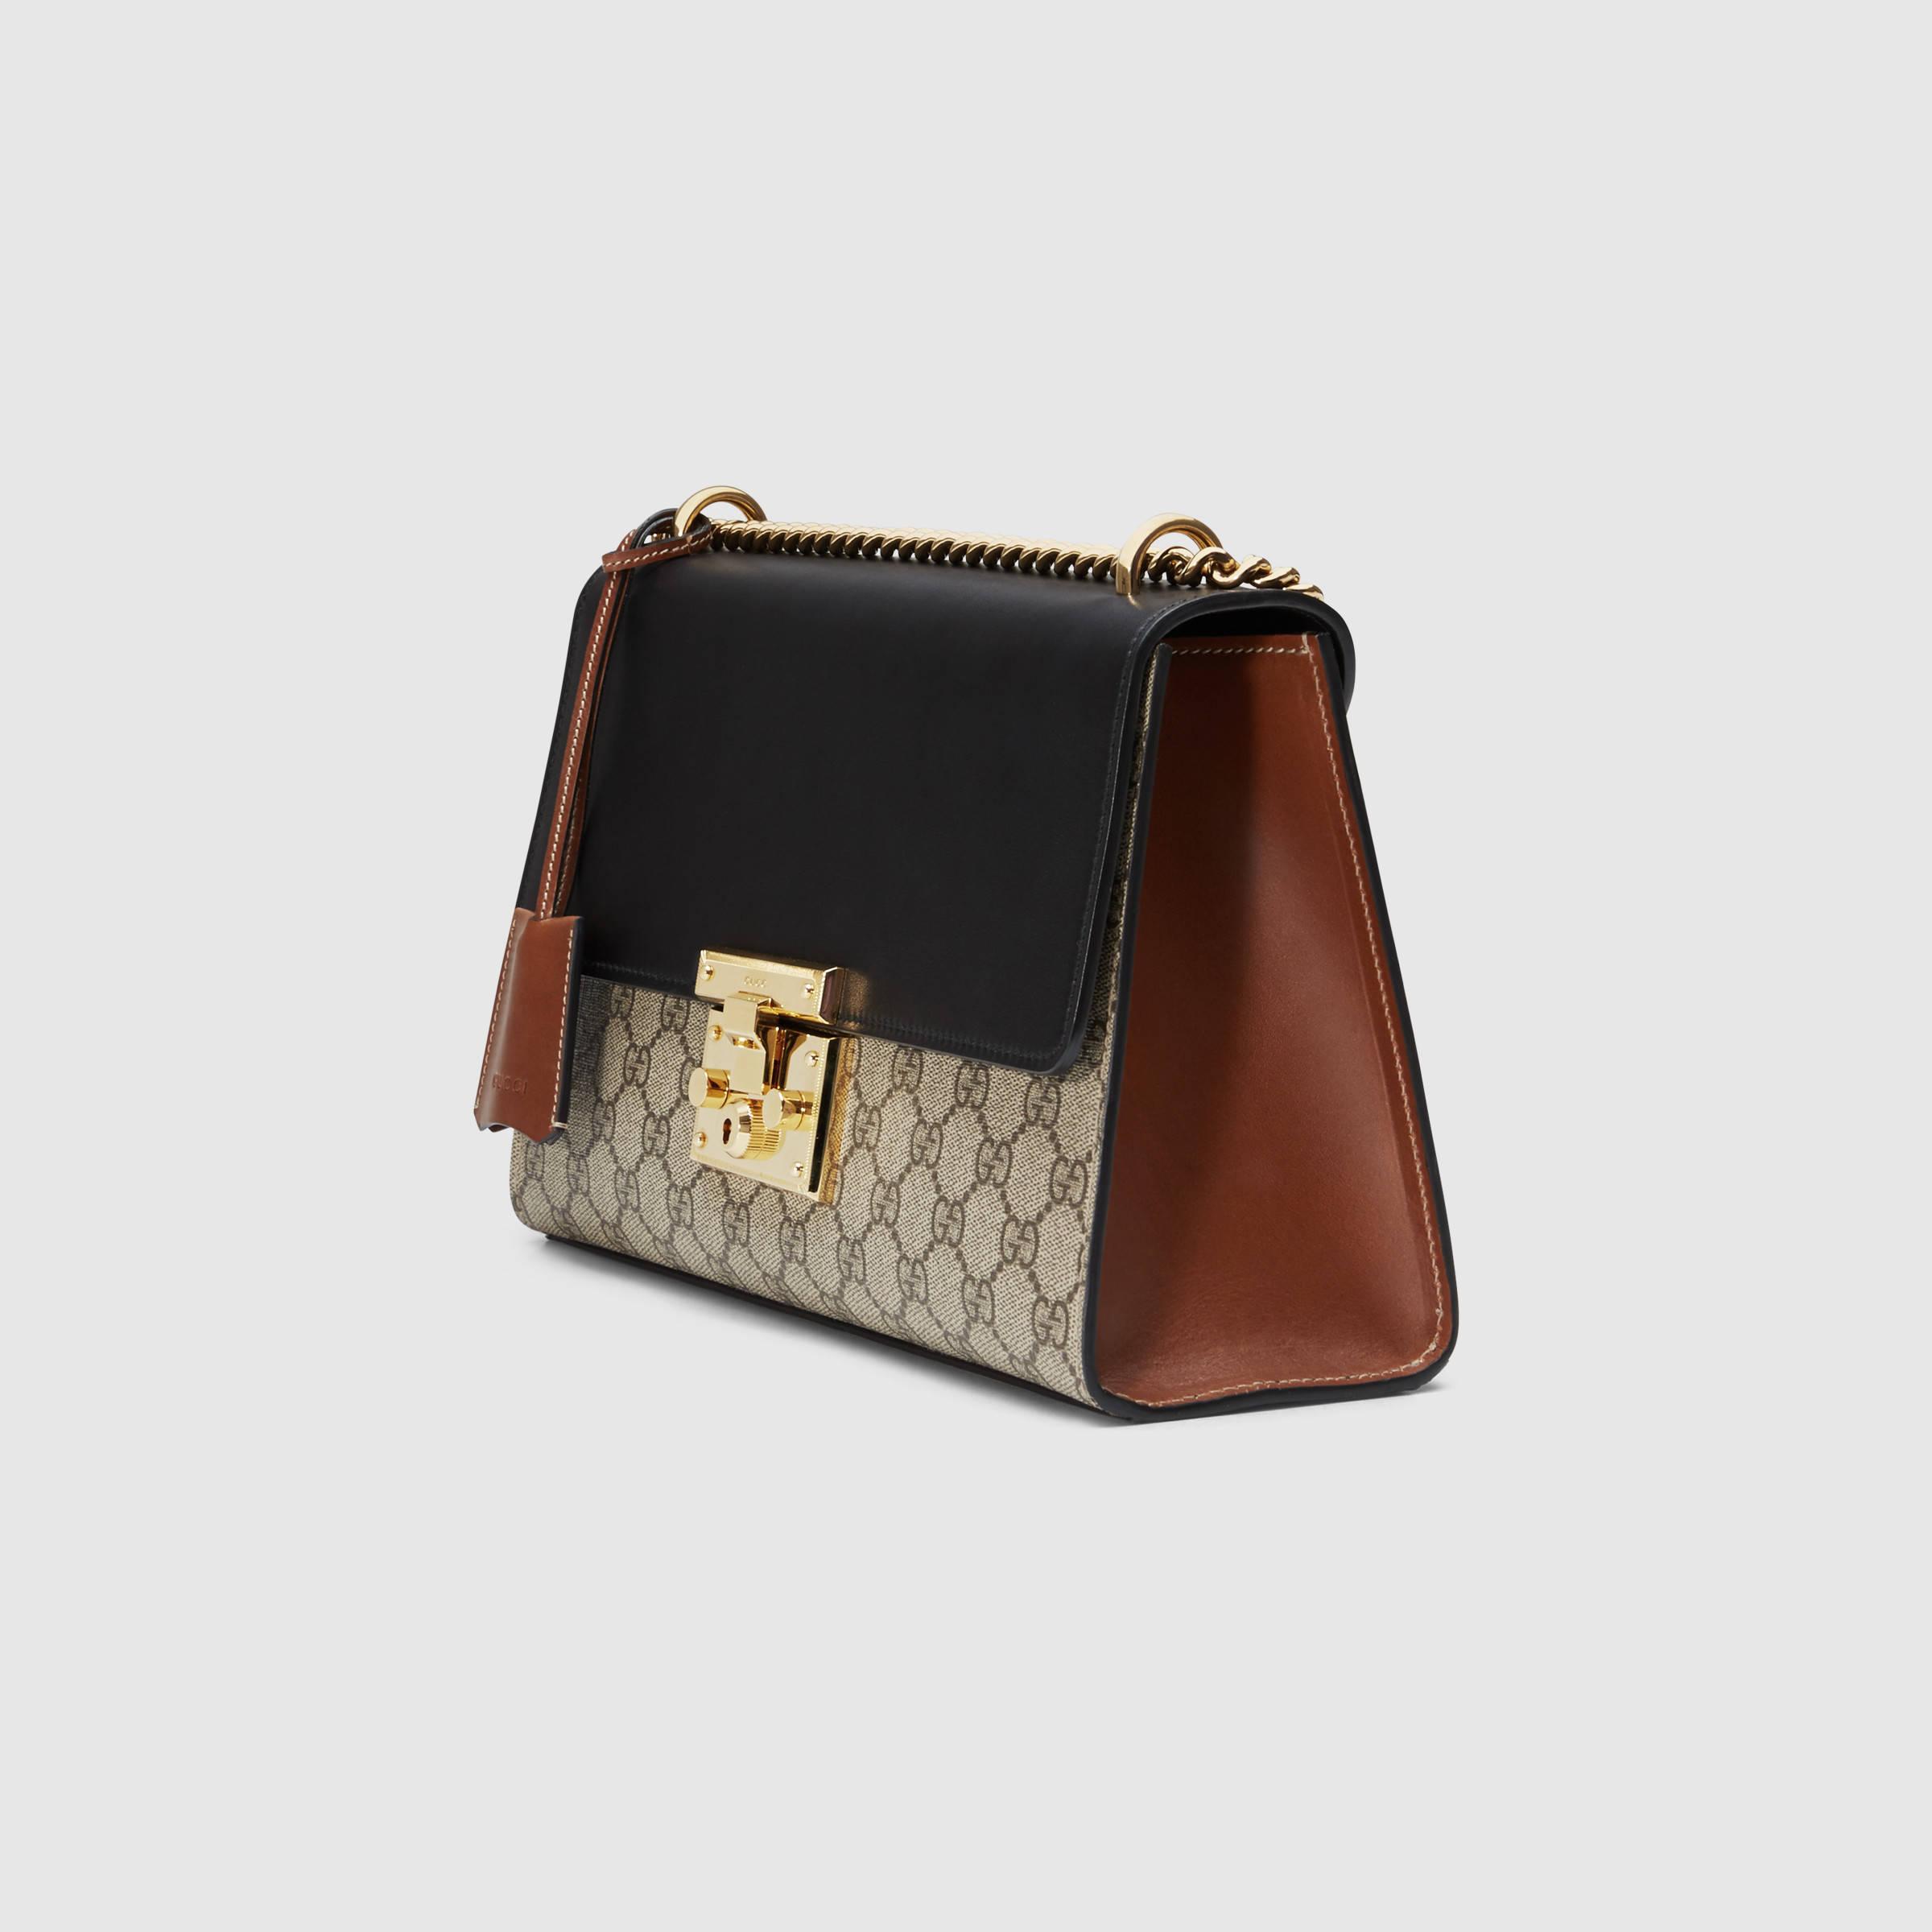 Lyst - Gucci Padlock GG Supreme Canvas And Leather Shoulder Bag